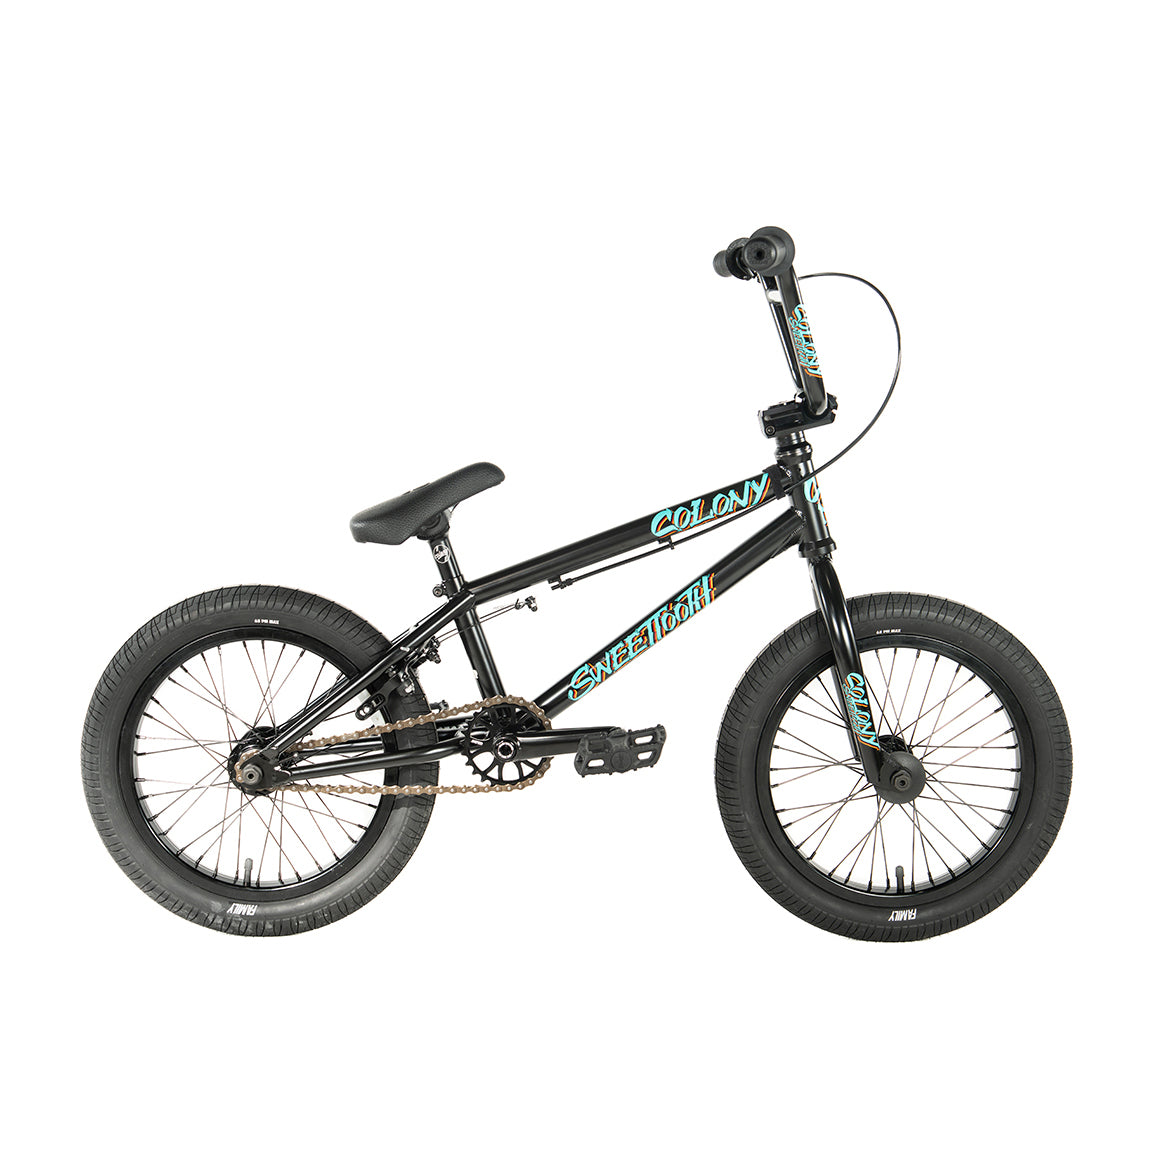 A Colony Sweet Tooth Pro 16 Inch BMX Bike on a white background.